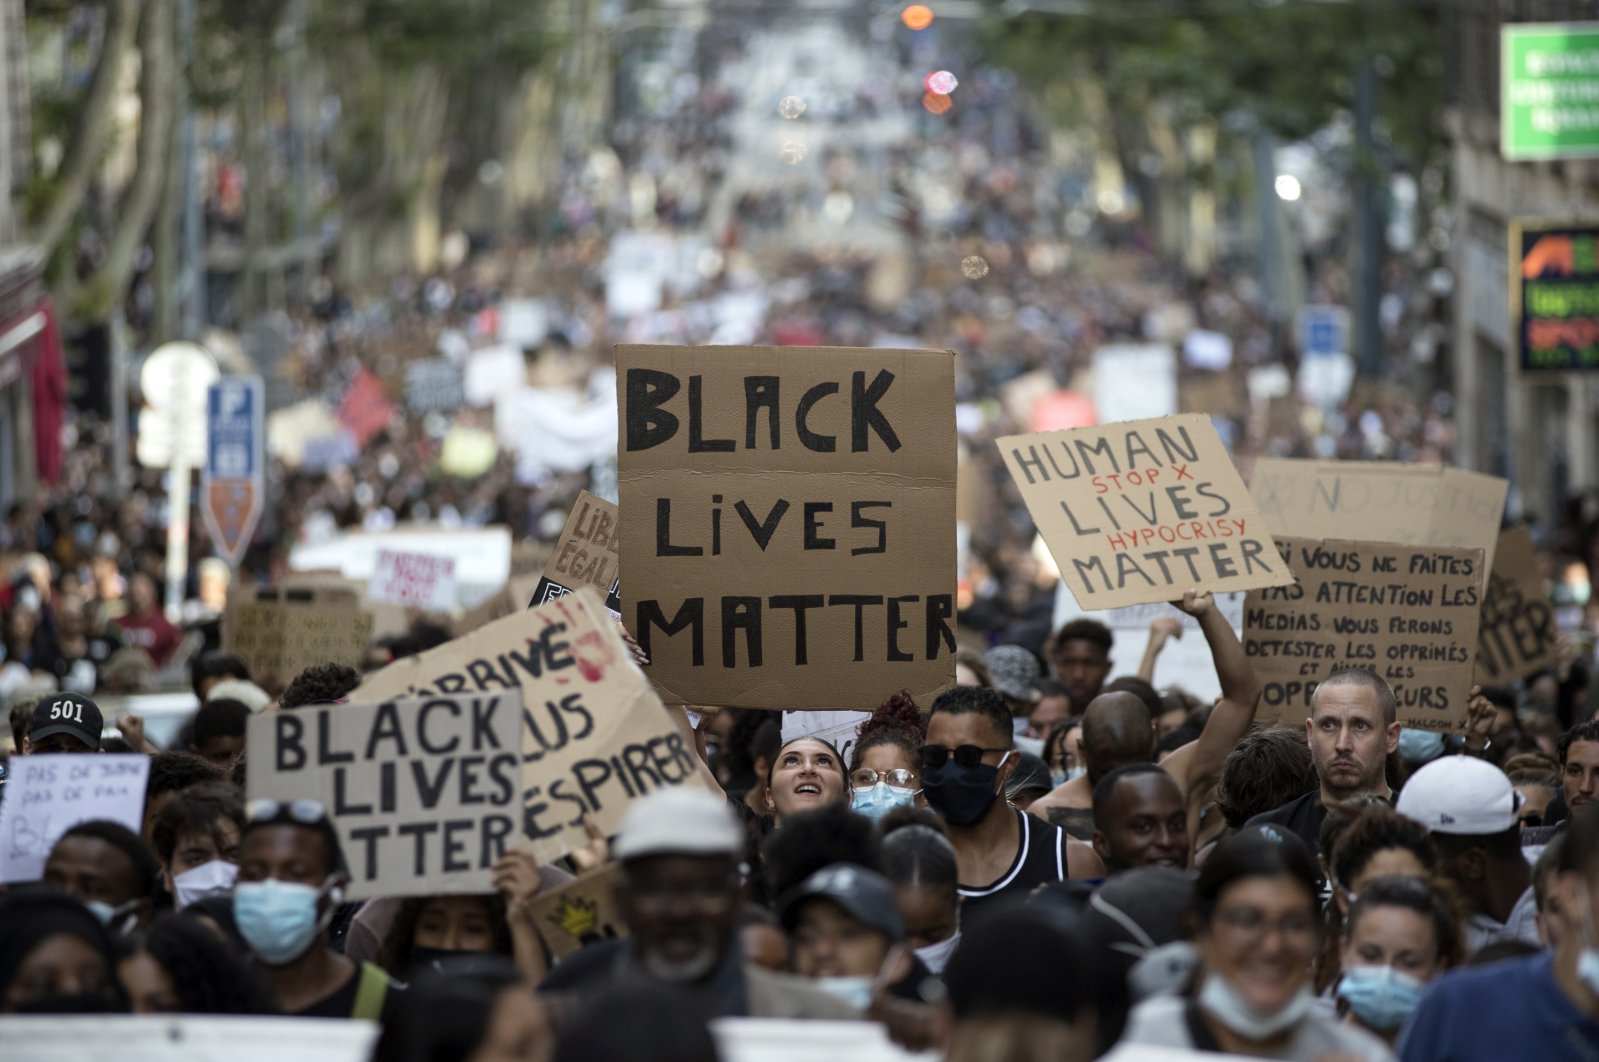 A protester looks up at a sign that reads "Black Lives Matter" in Marseille, southern France, during a protest against the recent death of George Floyd, June 6, 2020. (AP Photo)